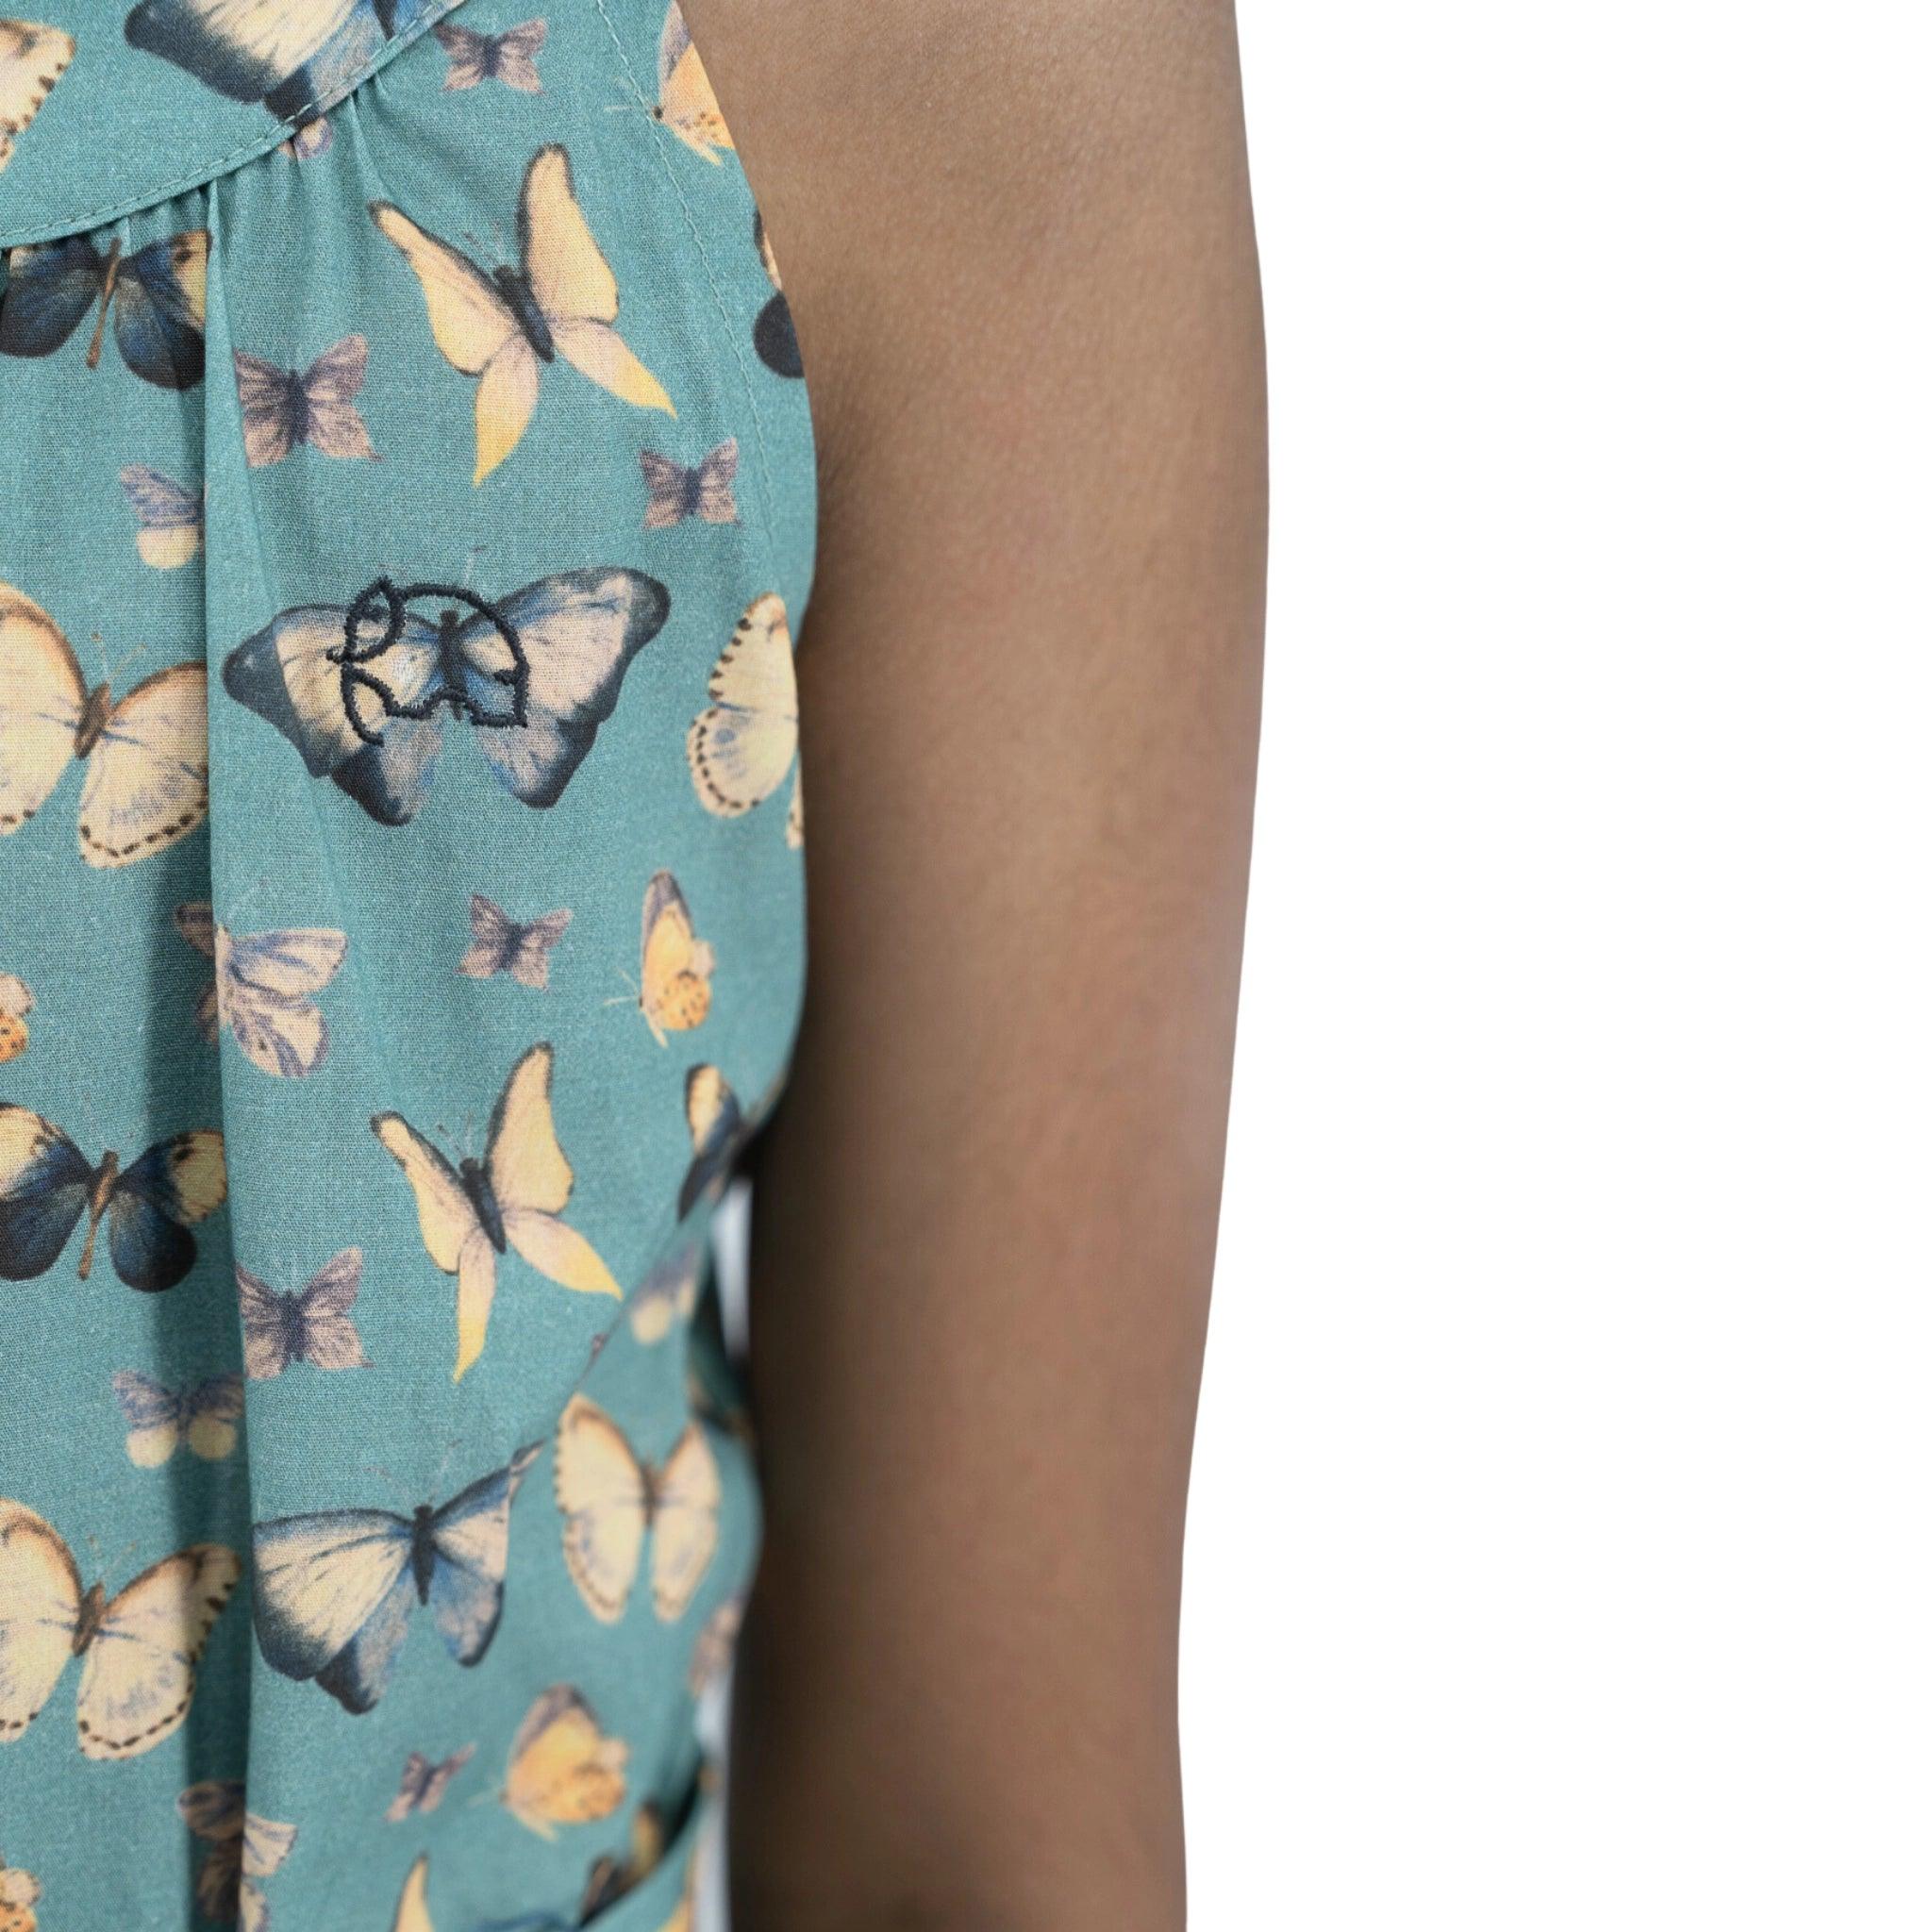 Close-up of a person wearing a Karee Blue Surf Adventure-ready Cotton Play Suit with butterfly patterned fabric, visible arm, and a small bow detail on the outfit.